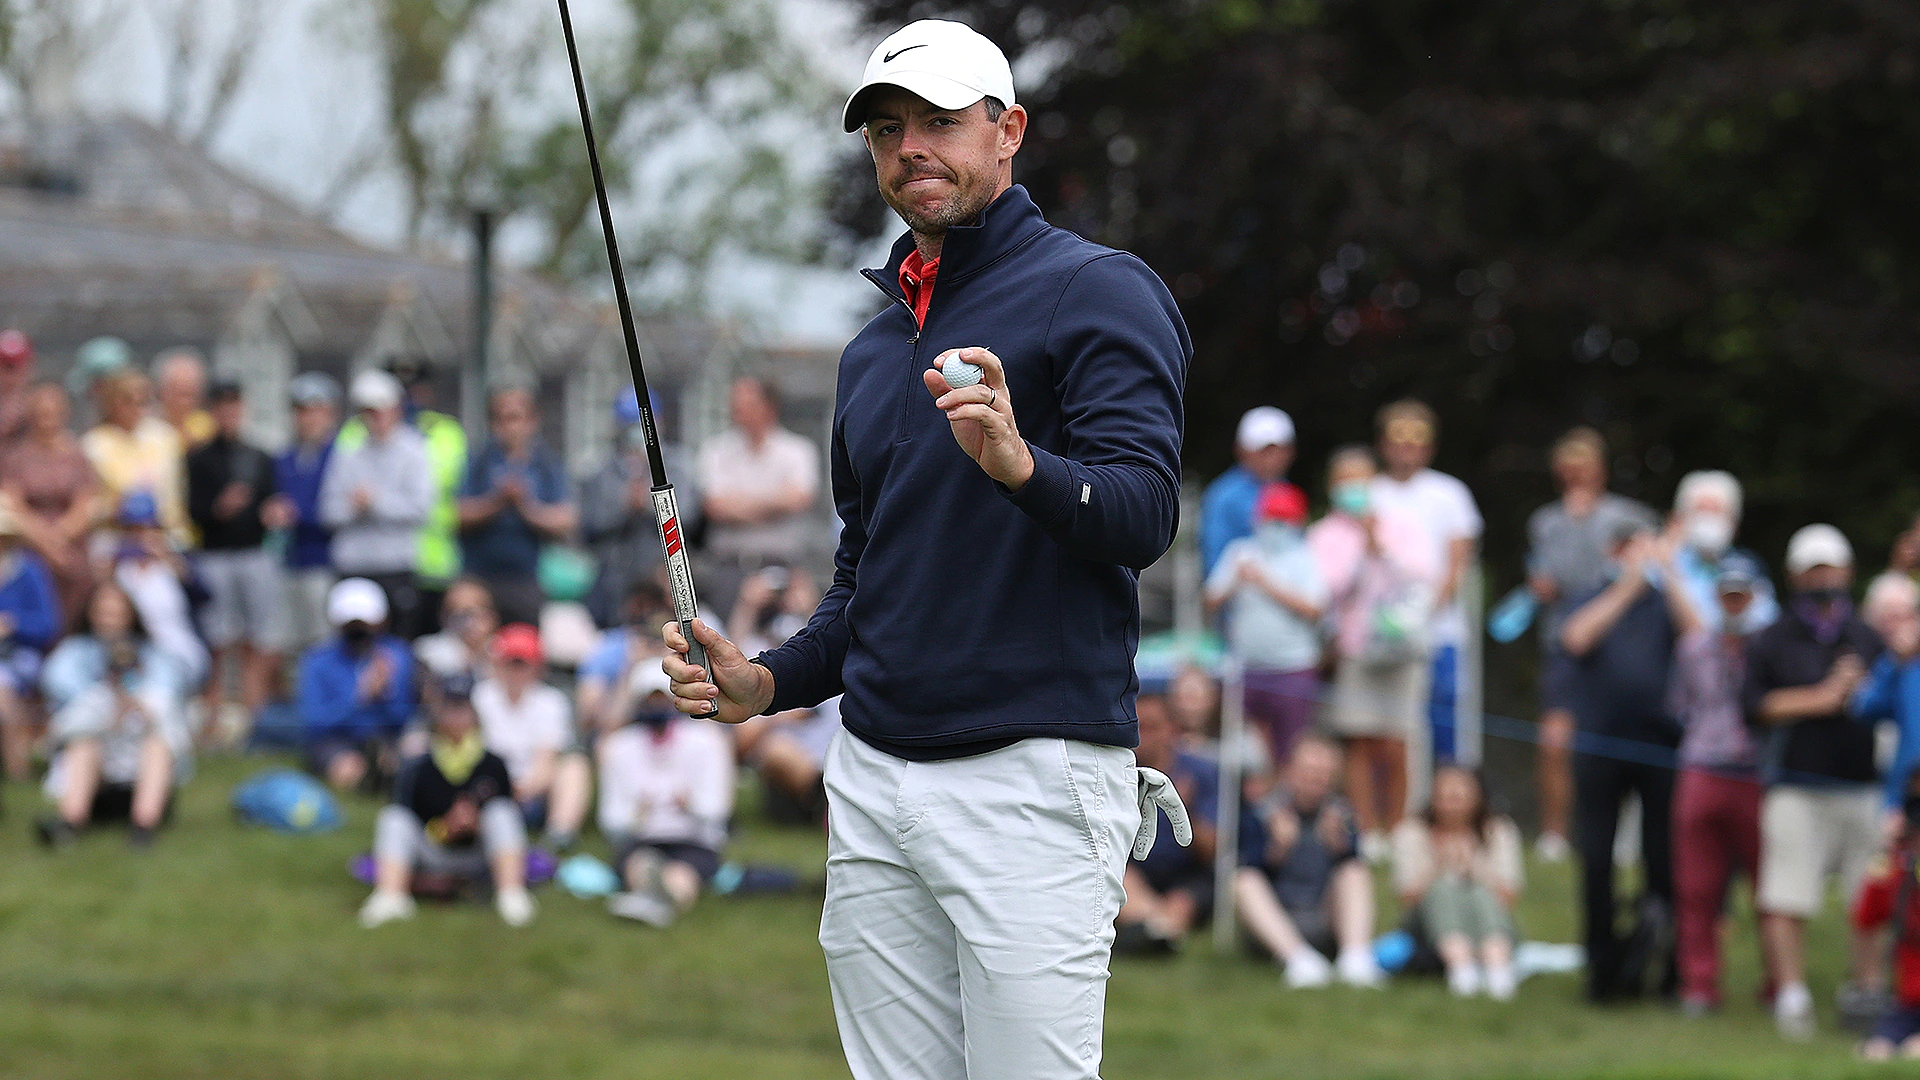 Rory McIlroy (67) not ‘back in contention, but I’m pretty close’ at Irish Open